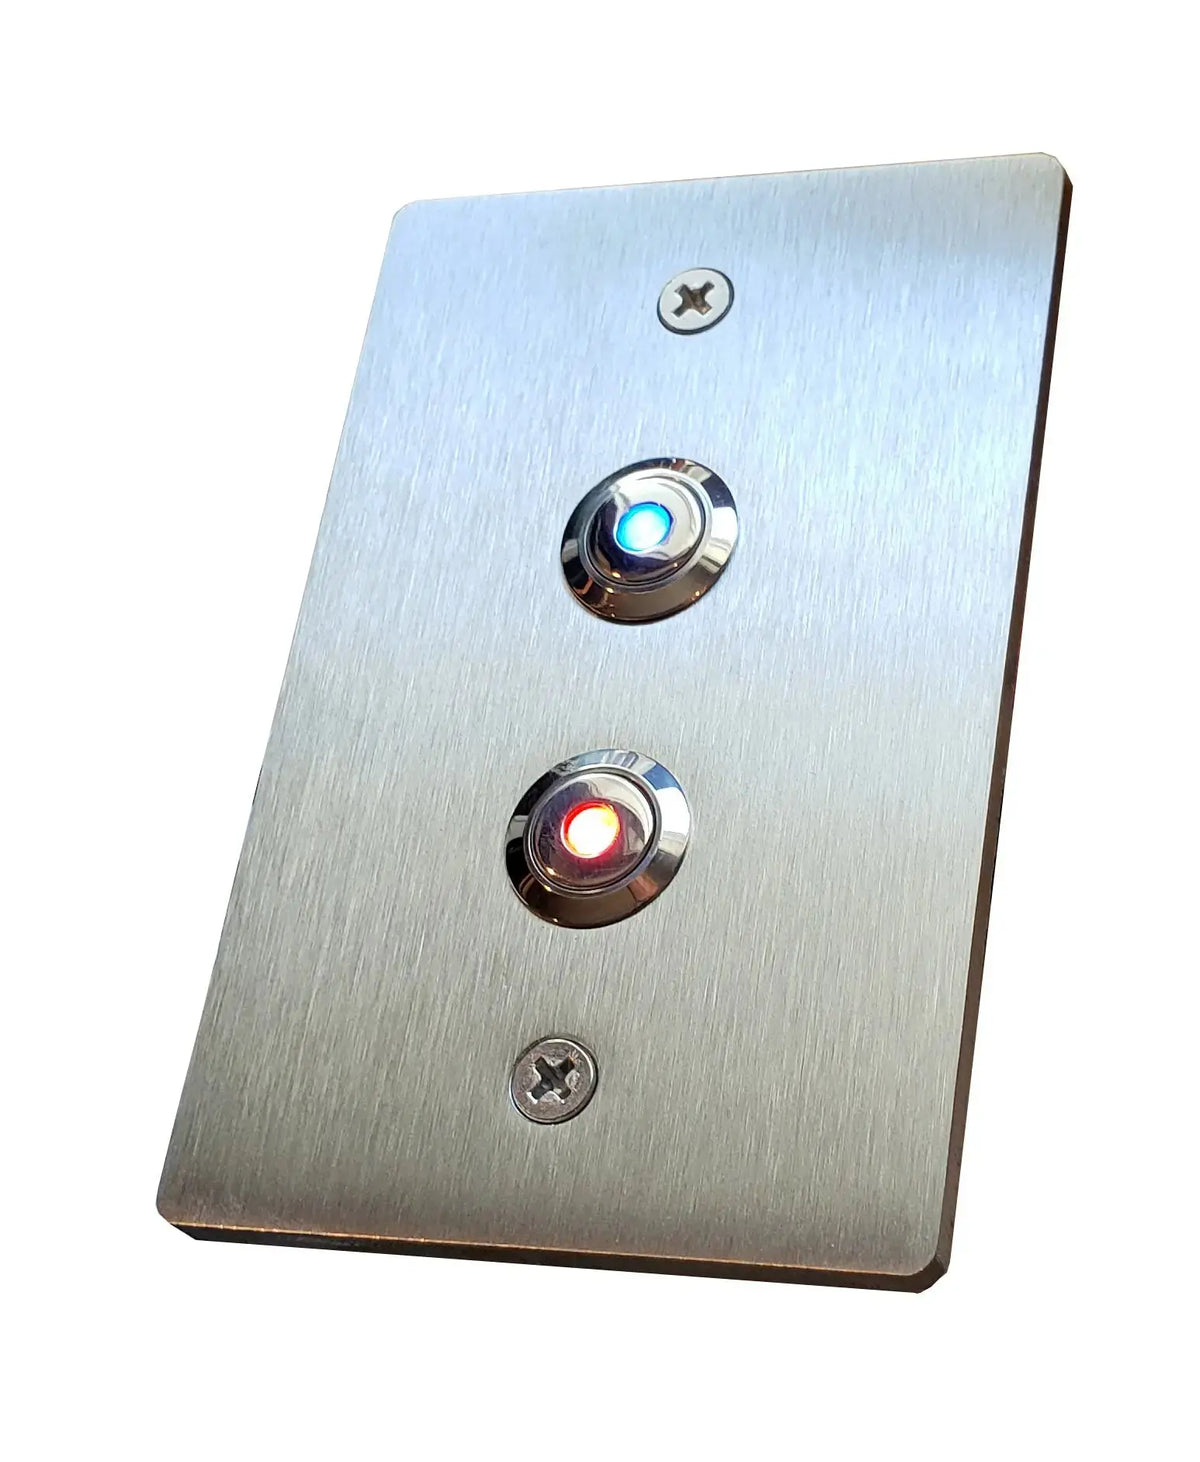 Stainless Steel Gangbox Double Doorbell Expressions LTD